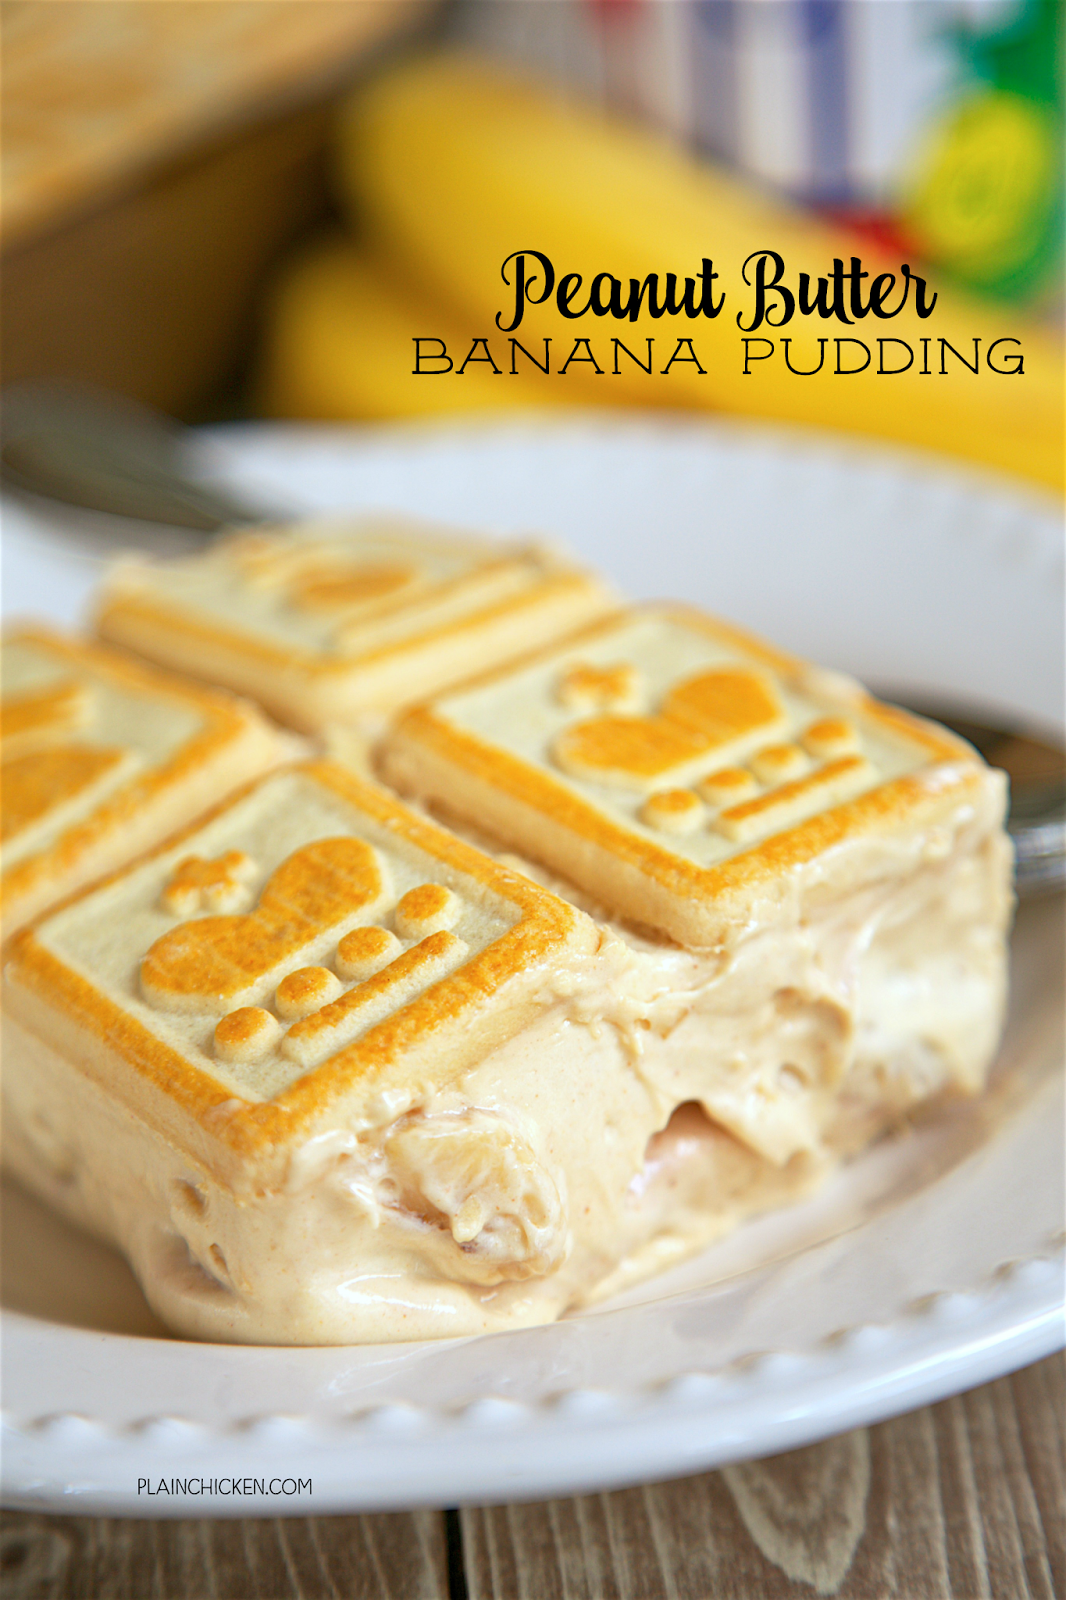 Peanut Butter Banana Pudding - peanut butter and bananas never tasted so good! Great dessert for a crowd! Can make ahead of time and refrigerate (it actually gets better the longer it sits). Chessmen cookies, bananas, milk, pudding, peanut butter, cream cheese, sweetened condensed milk and cool whip. Everyone always asks for the recipe!